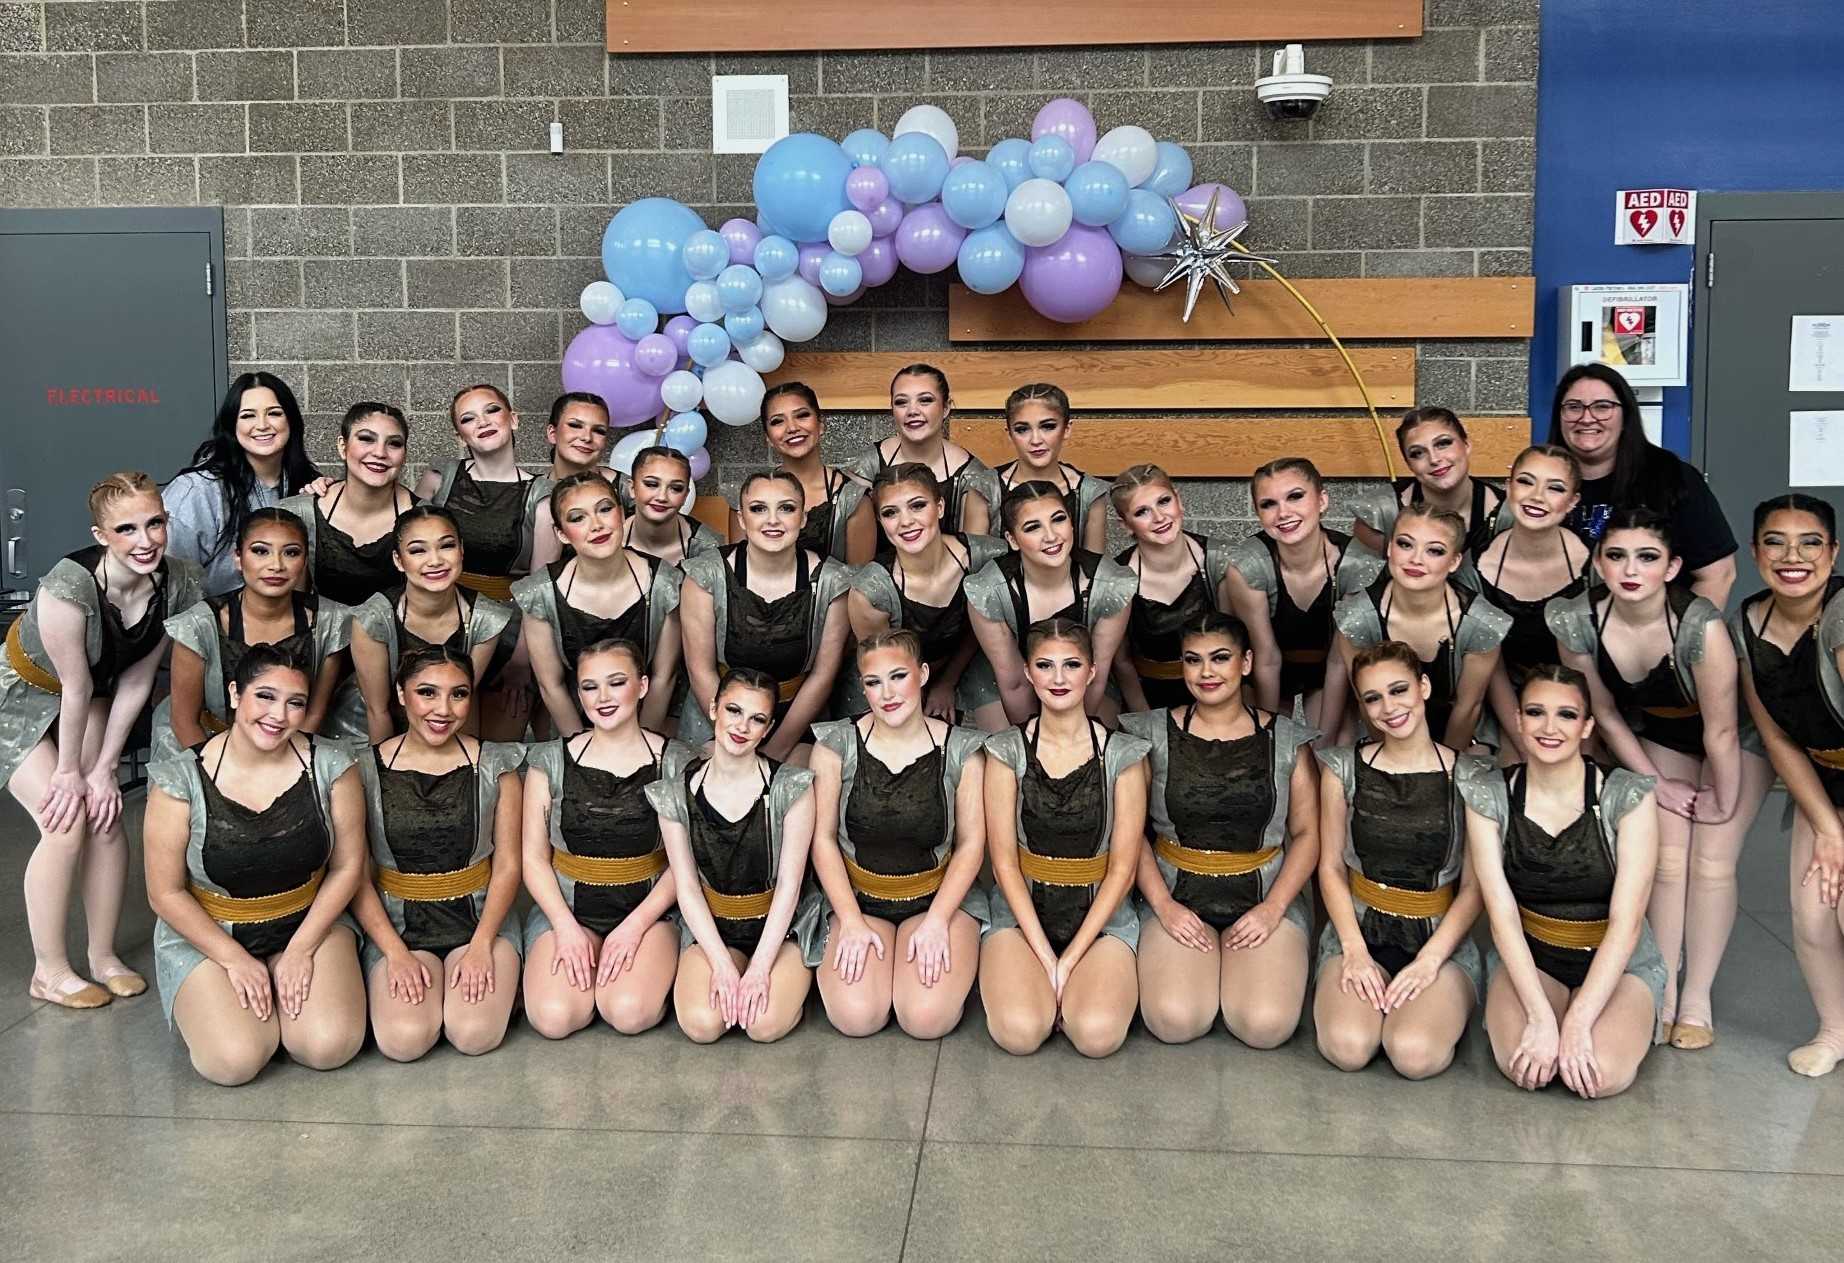 The Gresham Rhythmettes played host to more than a dozen teams in Saturday's competition.